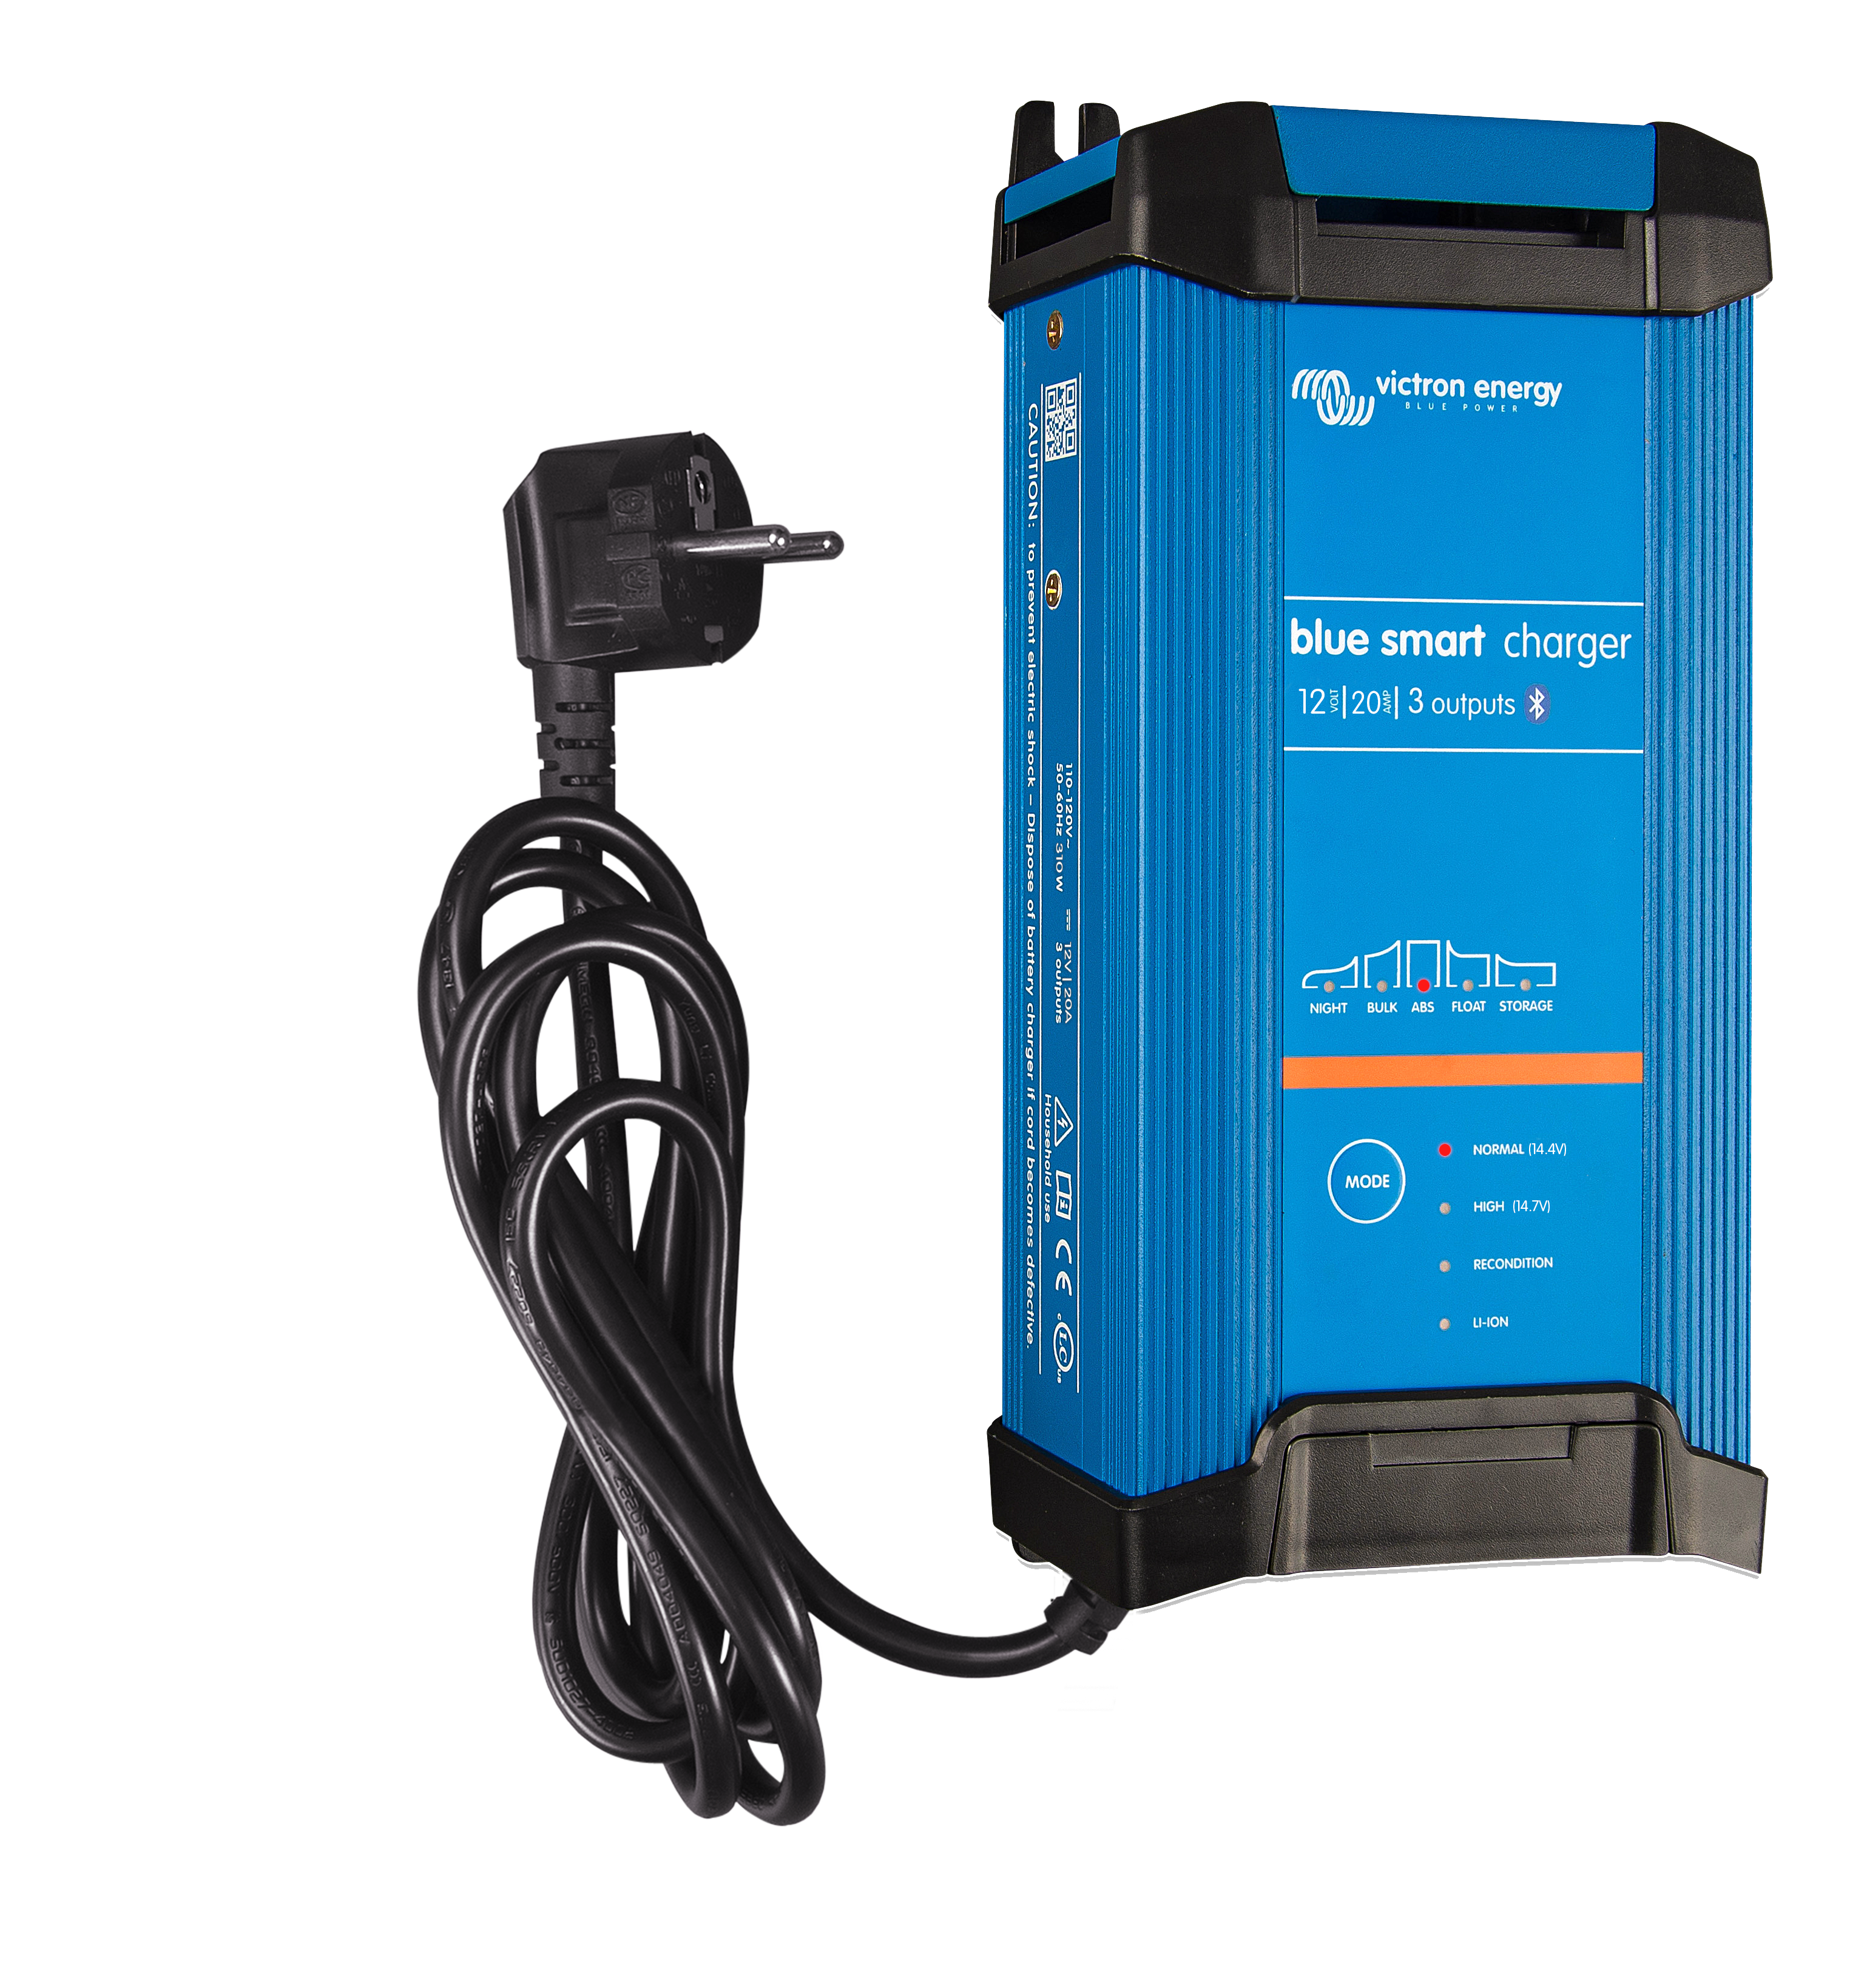 BlueSmart Charger IP 22 12 V / 30 A / 3 charging outputs only 239,95 €